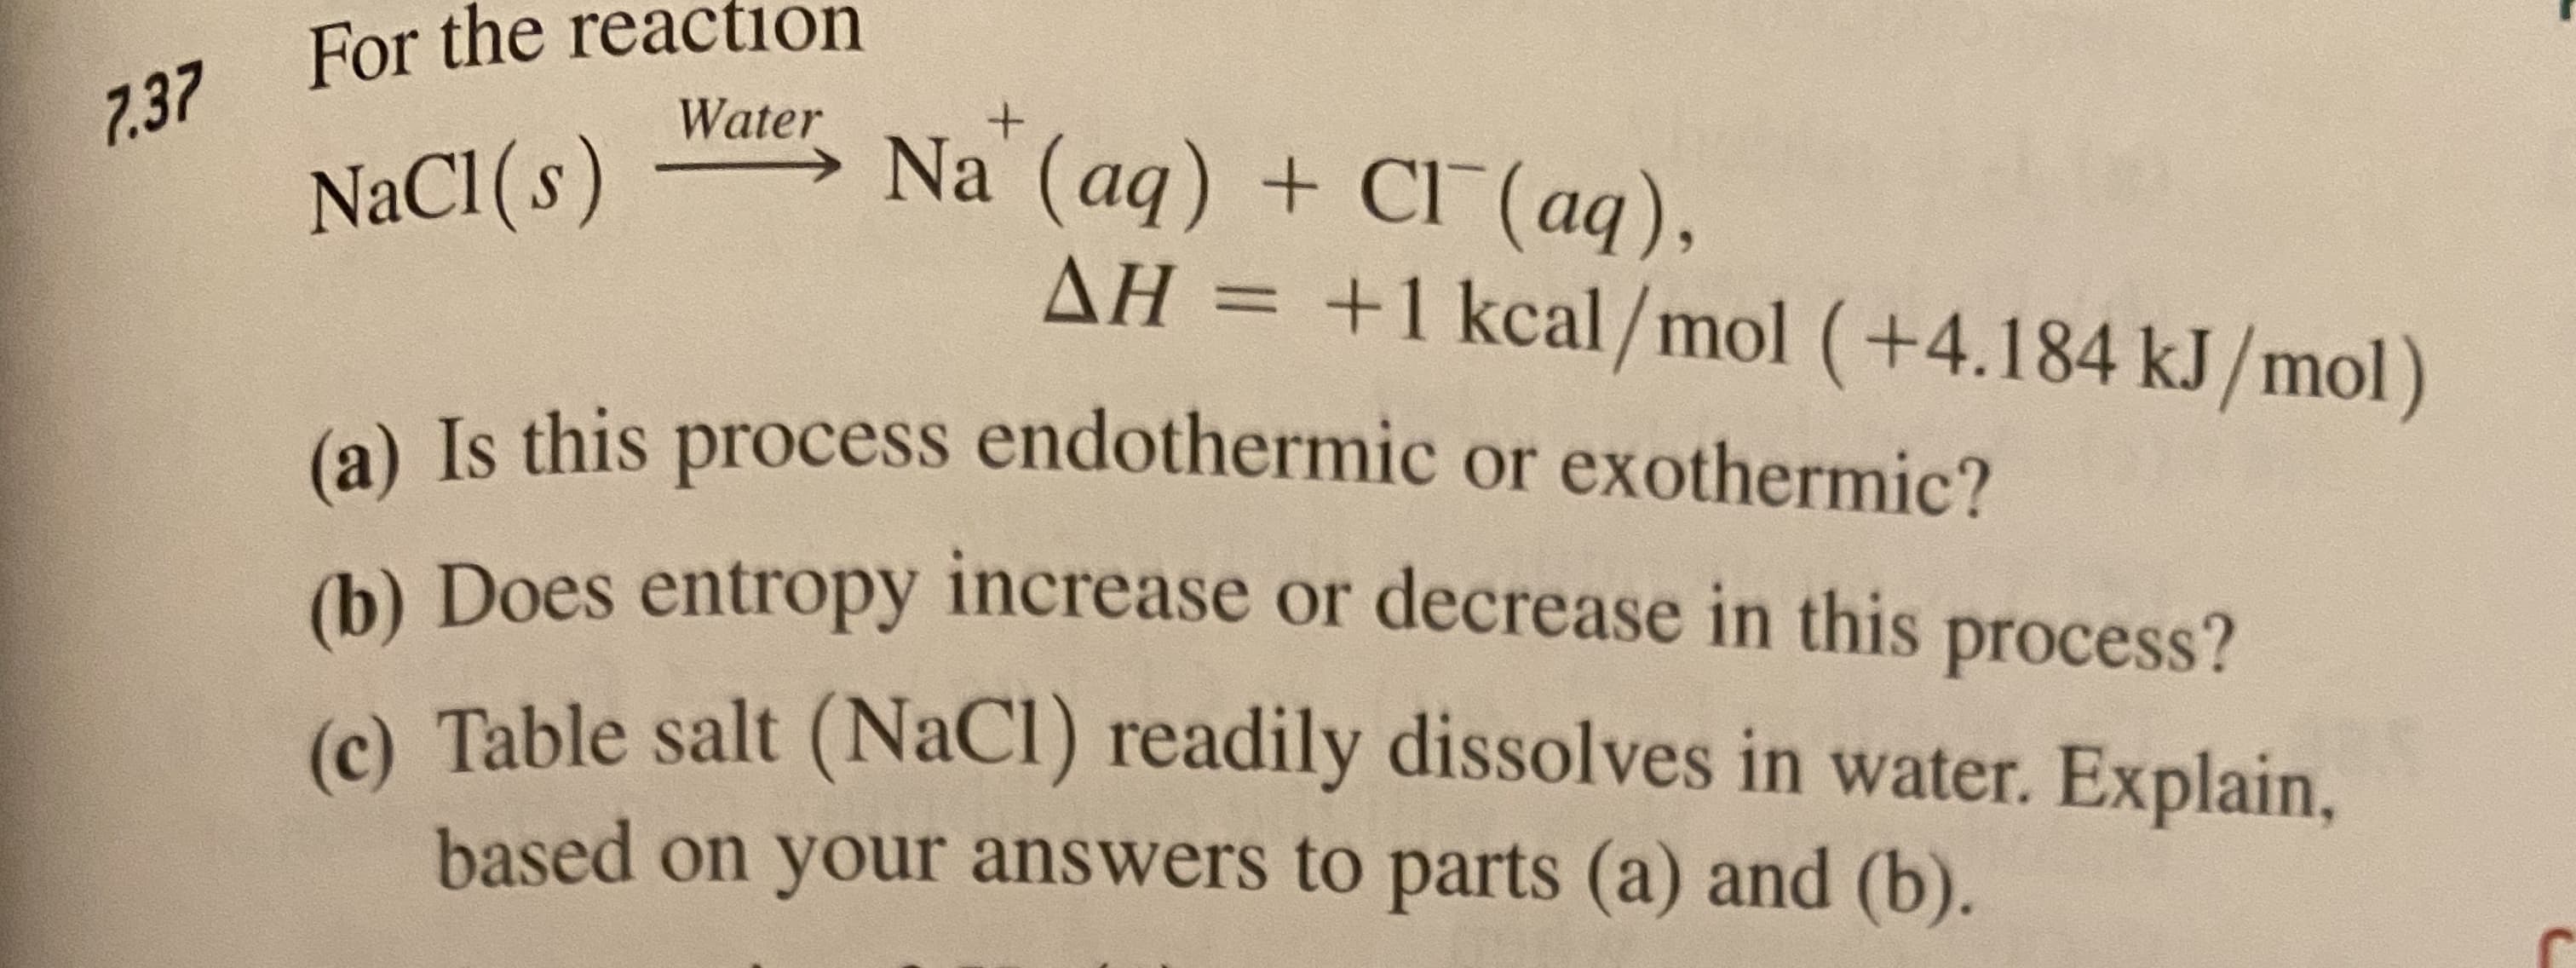 For the reaction
7.37
Water
Na (aq) + CI (aq),
AH = +1 kcal/mol (+4.184 kJ/mol)
NaCI (s)
(a) Is this process endothermic or exothermic?
(b) Does entropy increase or decrease in this process?
(). Table salt (NaCl) readily dissolves in water. Explain,
based on your answers to parts (a) and (b).
